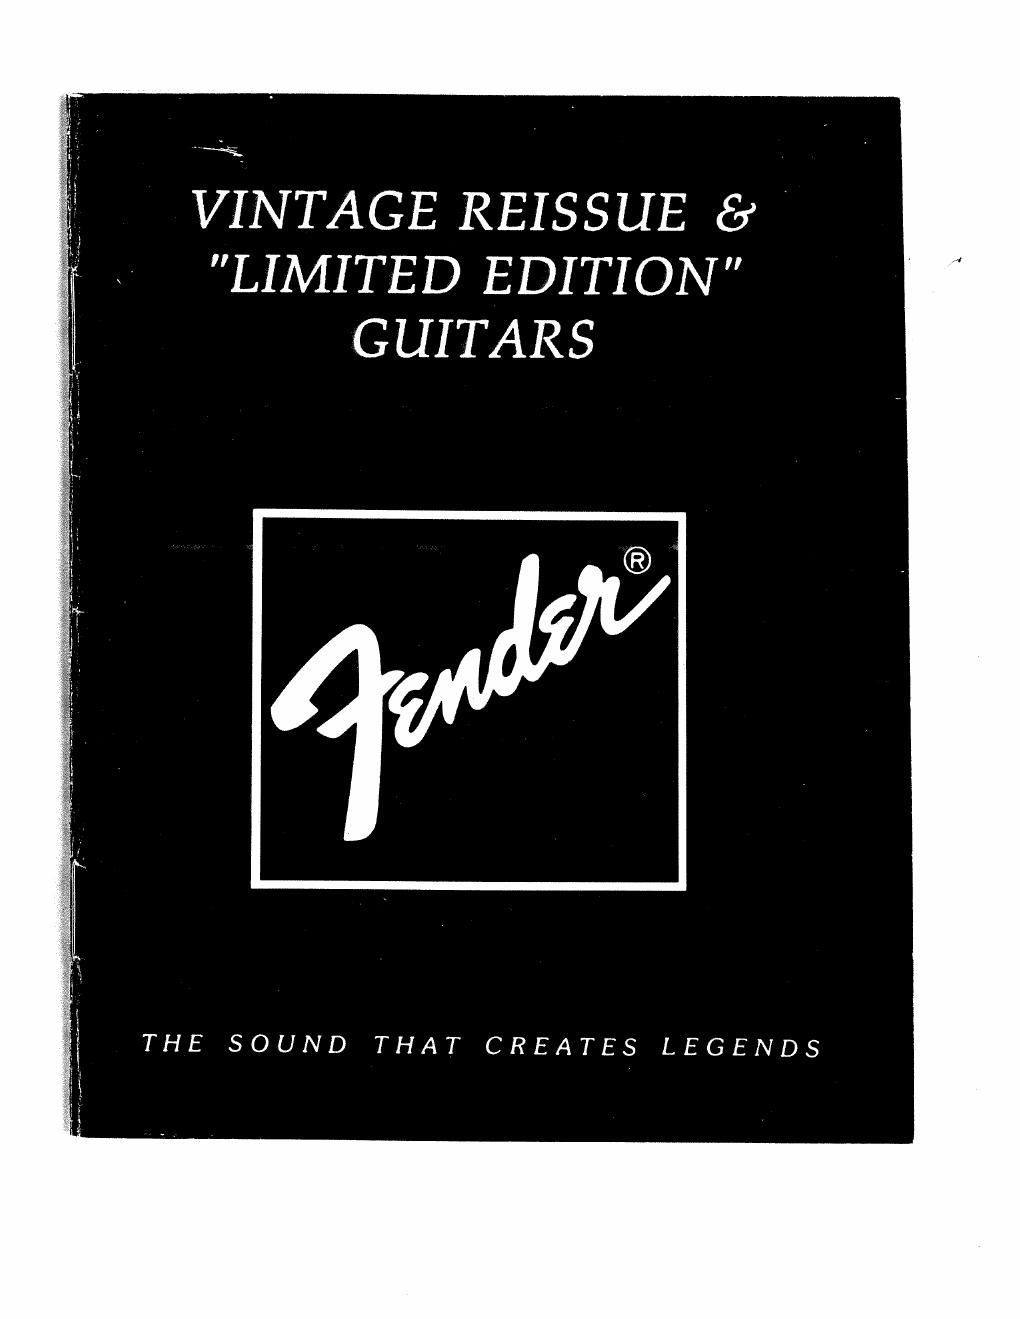 fender vintage re issue guitars and basses 1986 japan manual